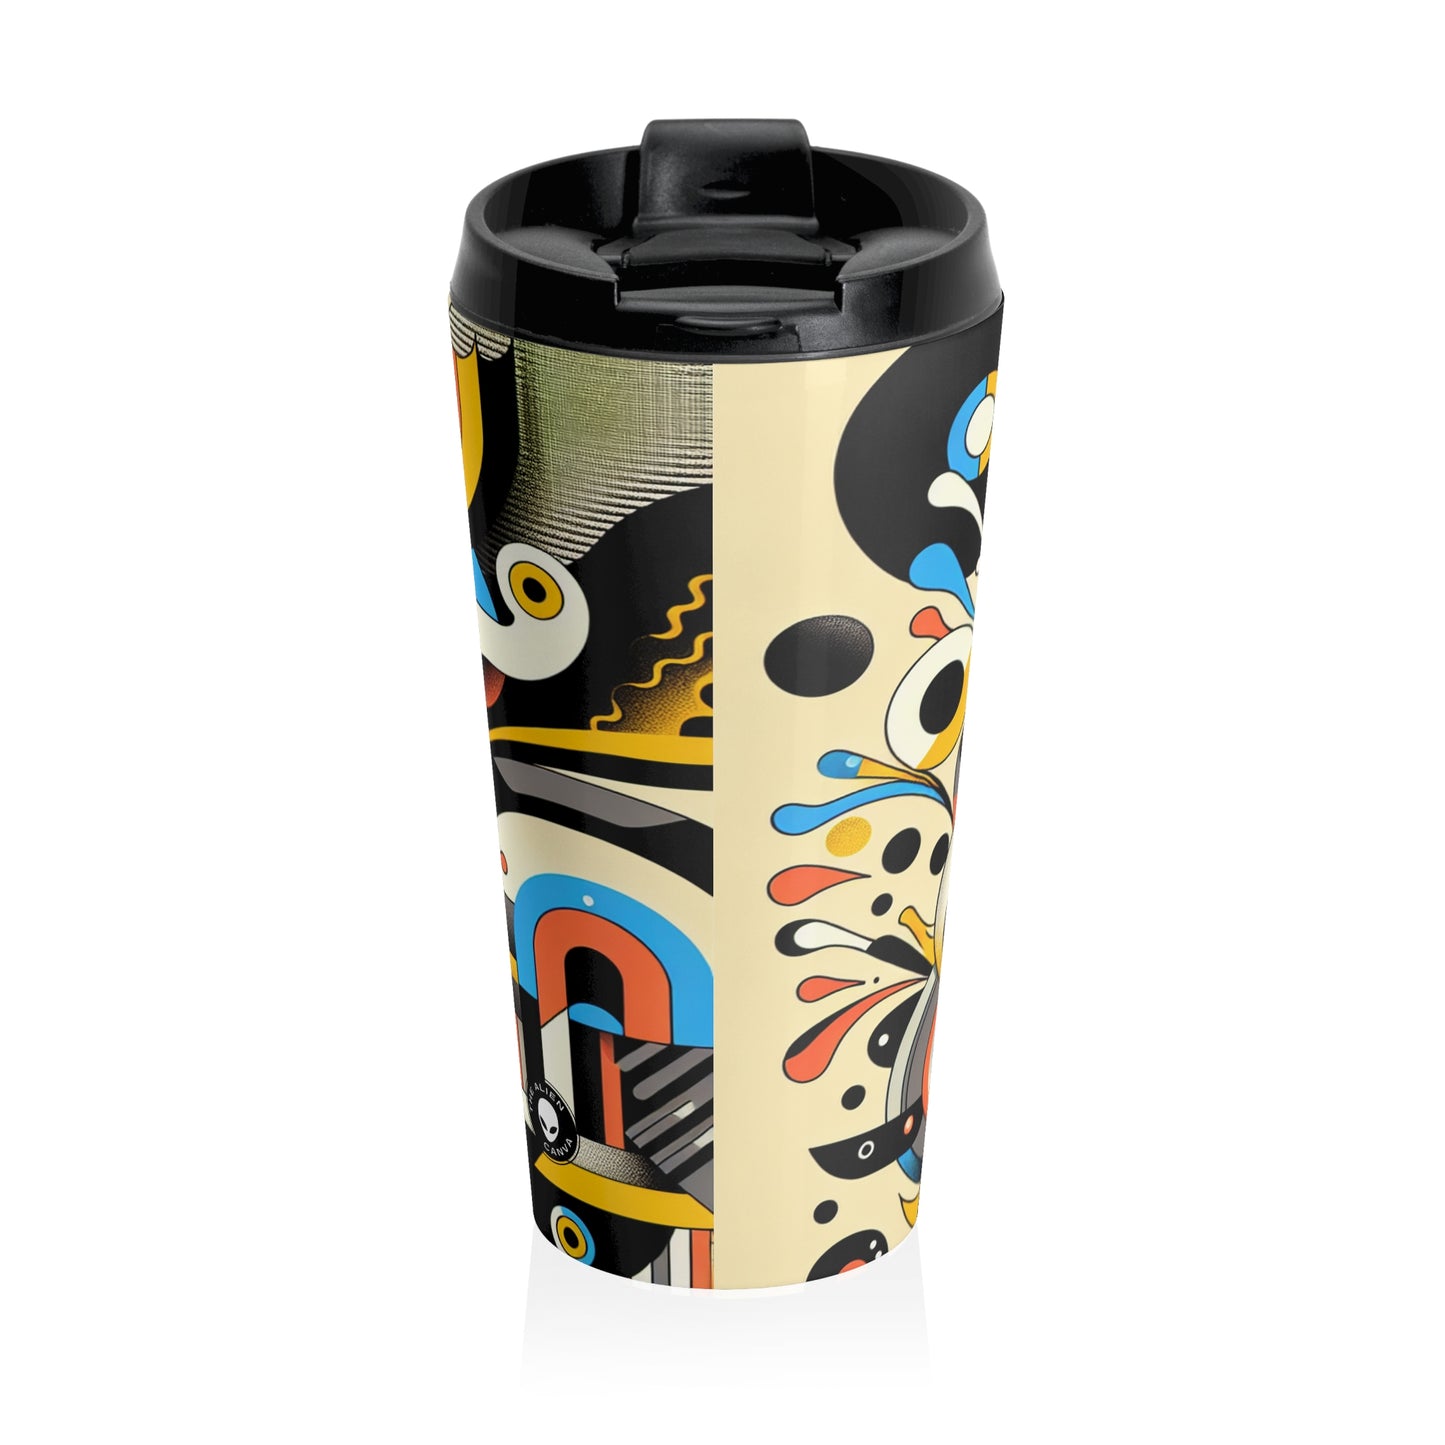 "Dada Fusion: A Whimsical Chaos of Everyday Objects" - The Alien Stainless Steel Travel Mug Neo-Dada